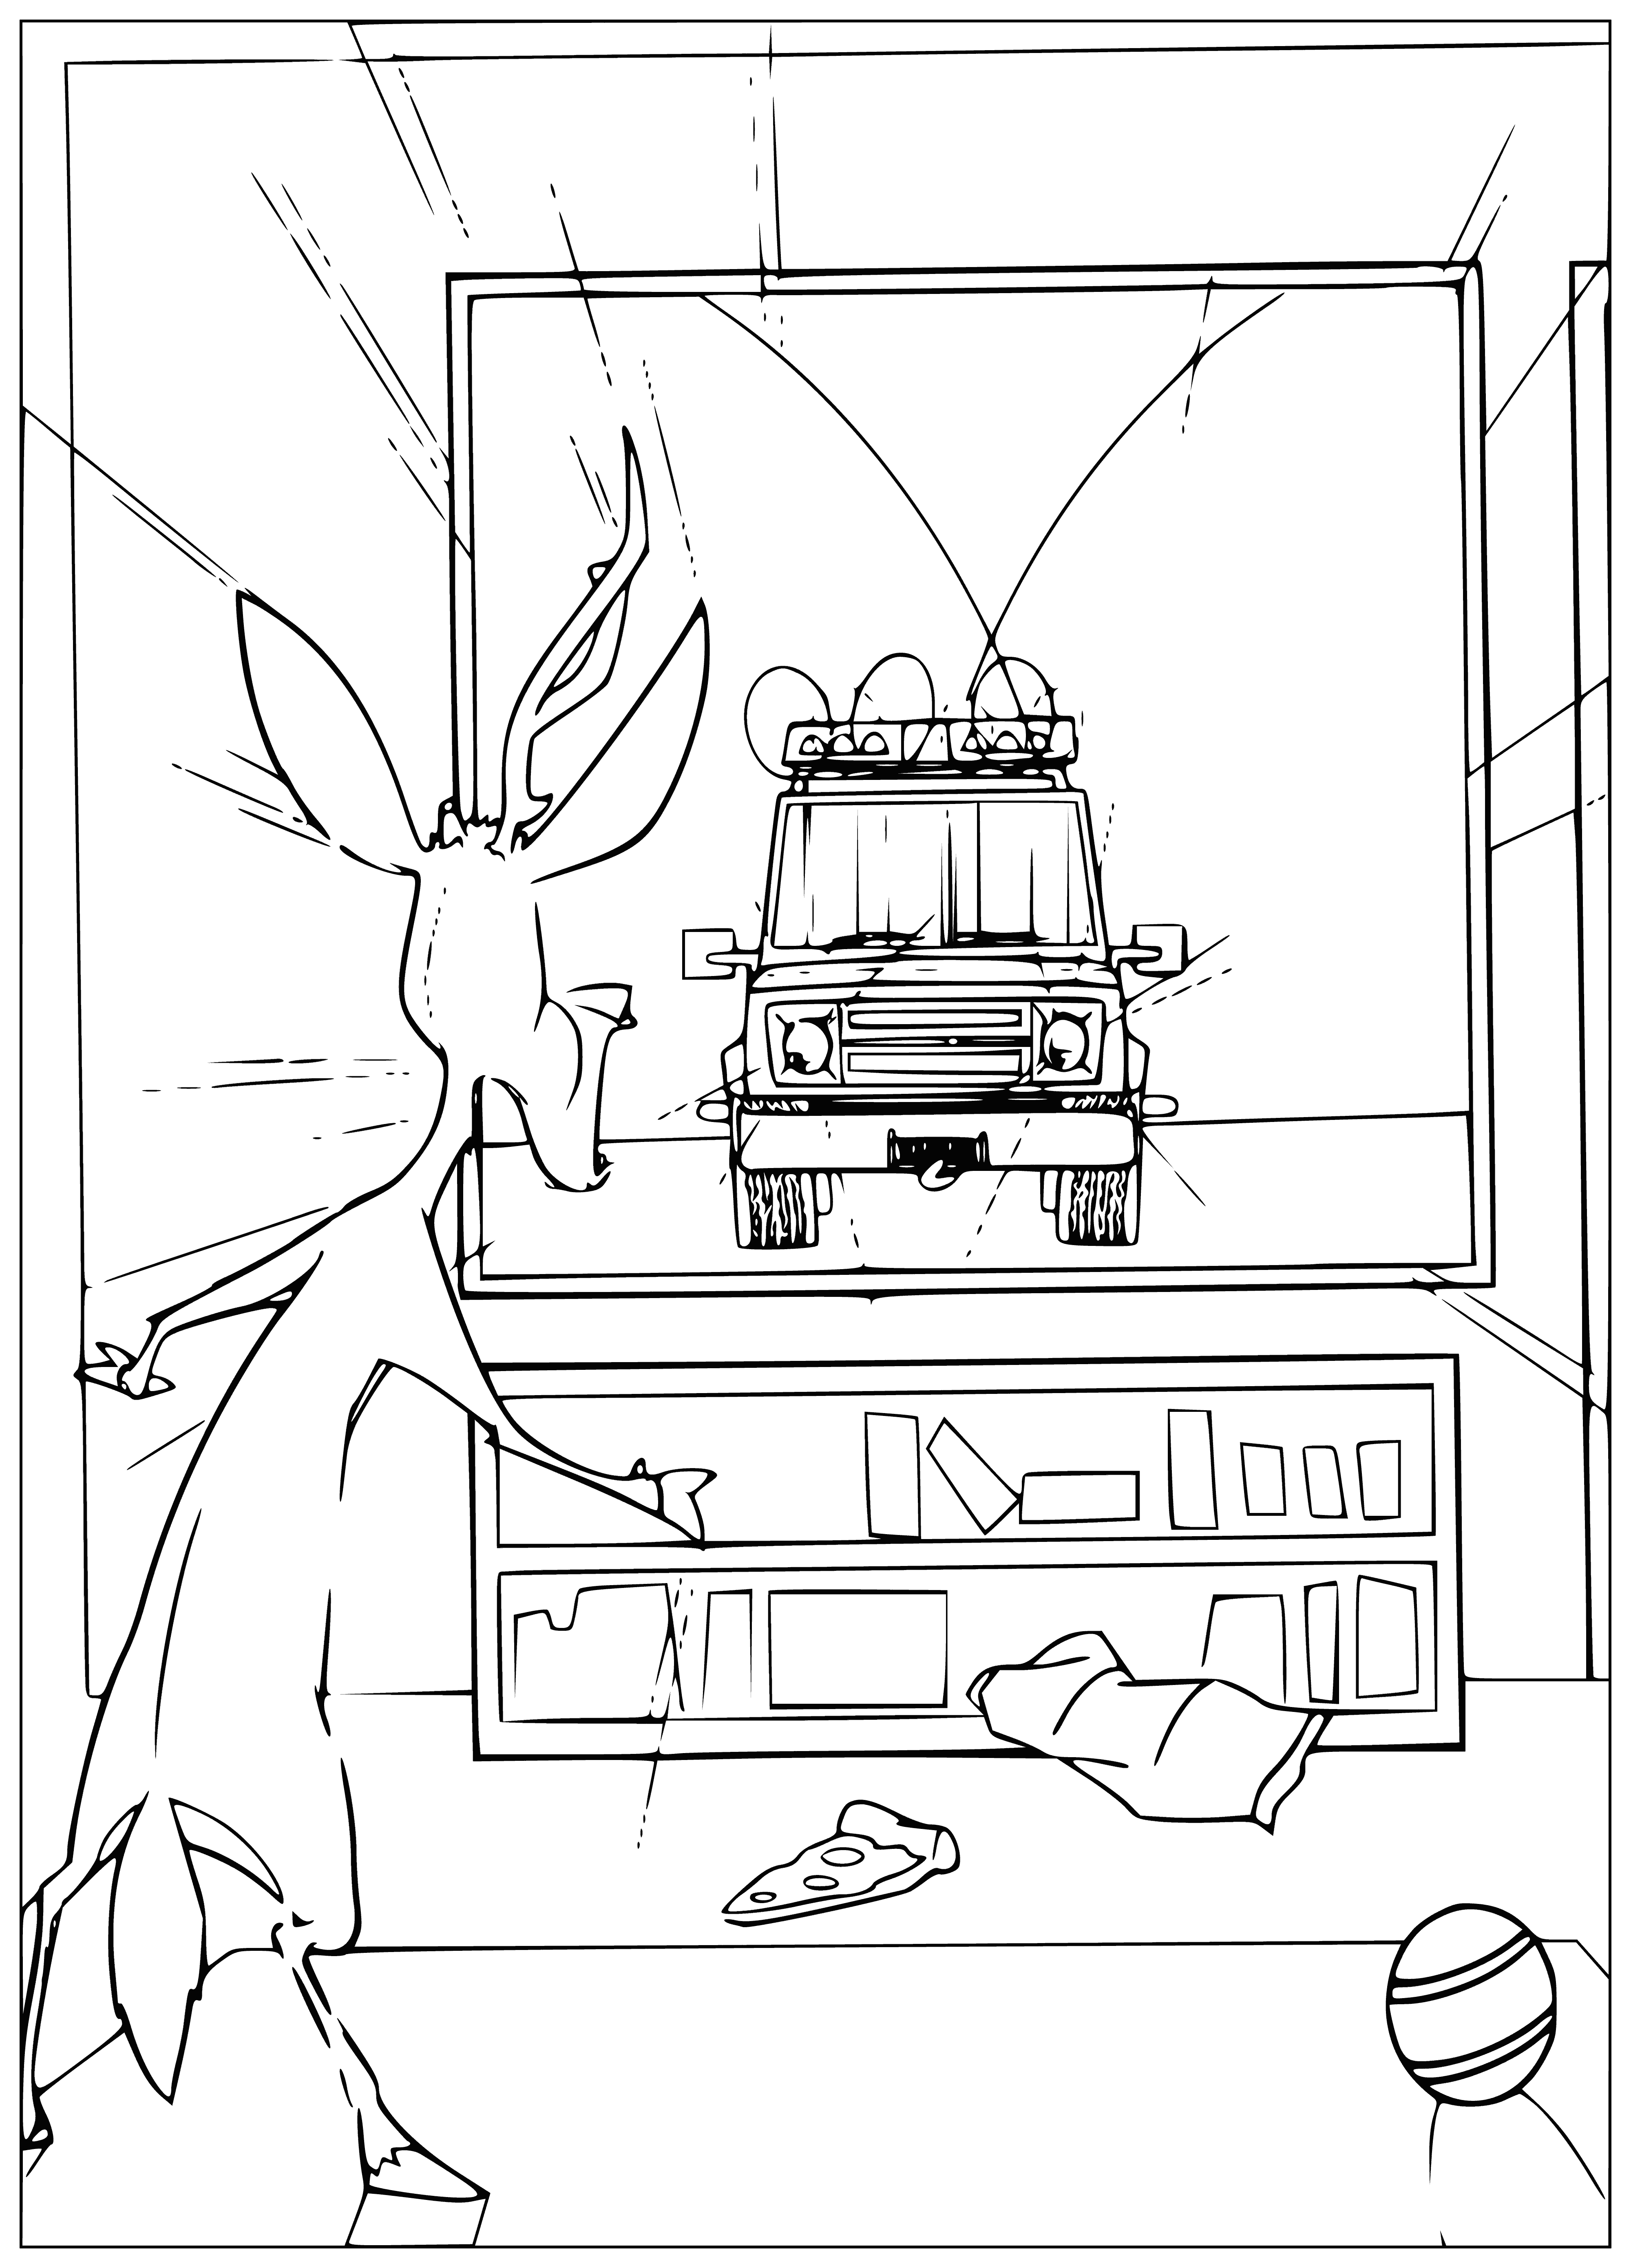 Shedding! The cops! coloring page